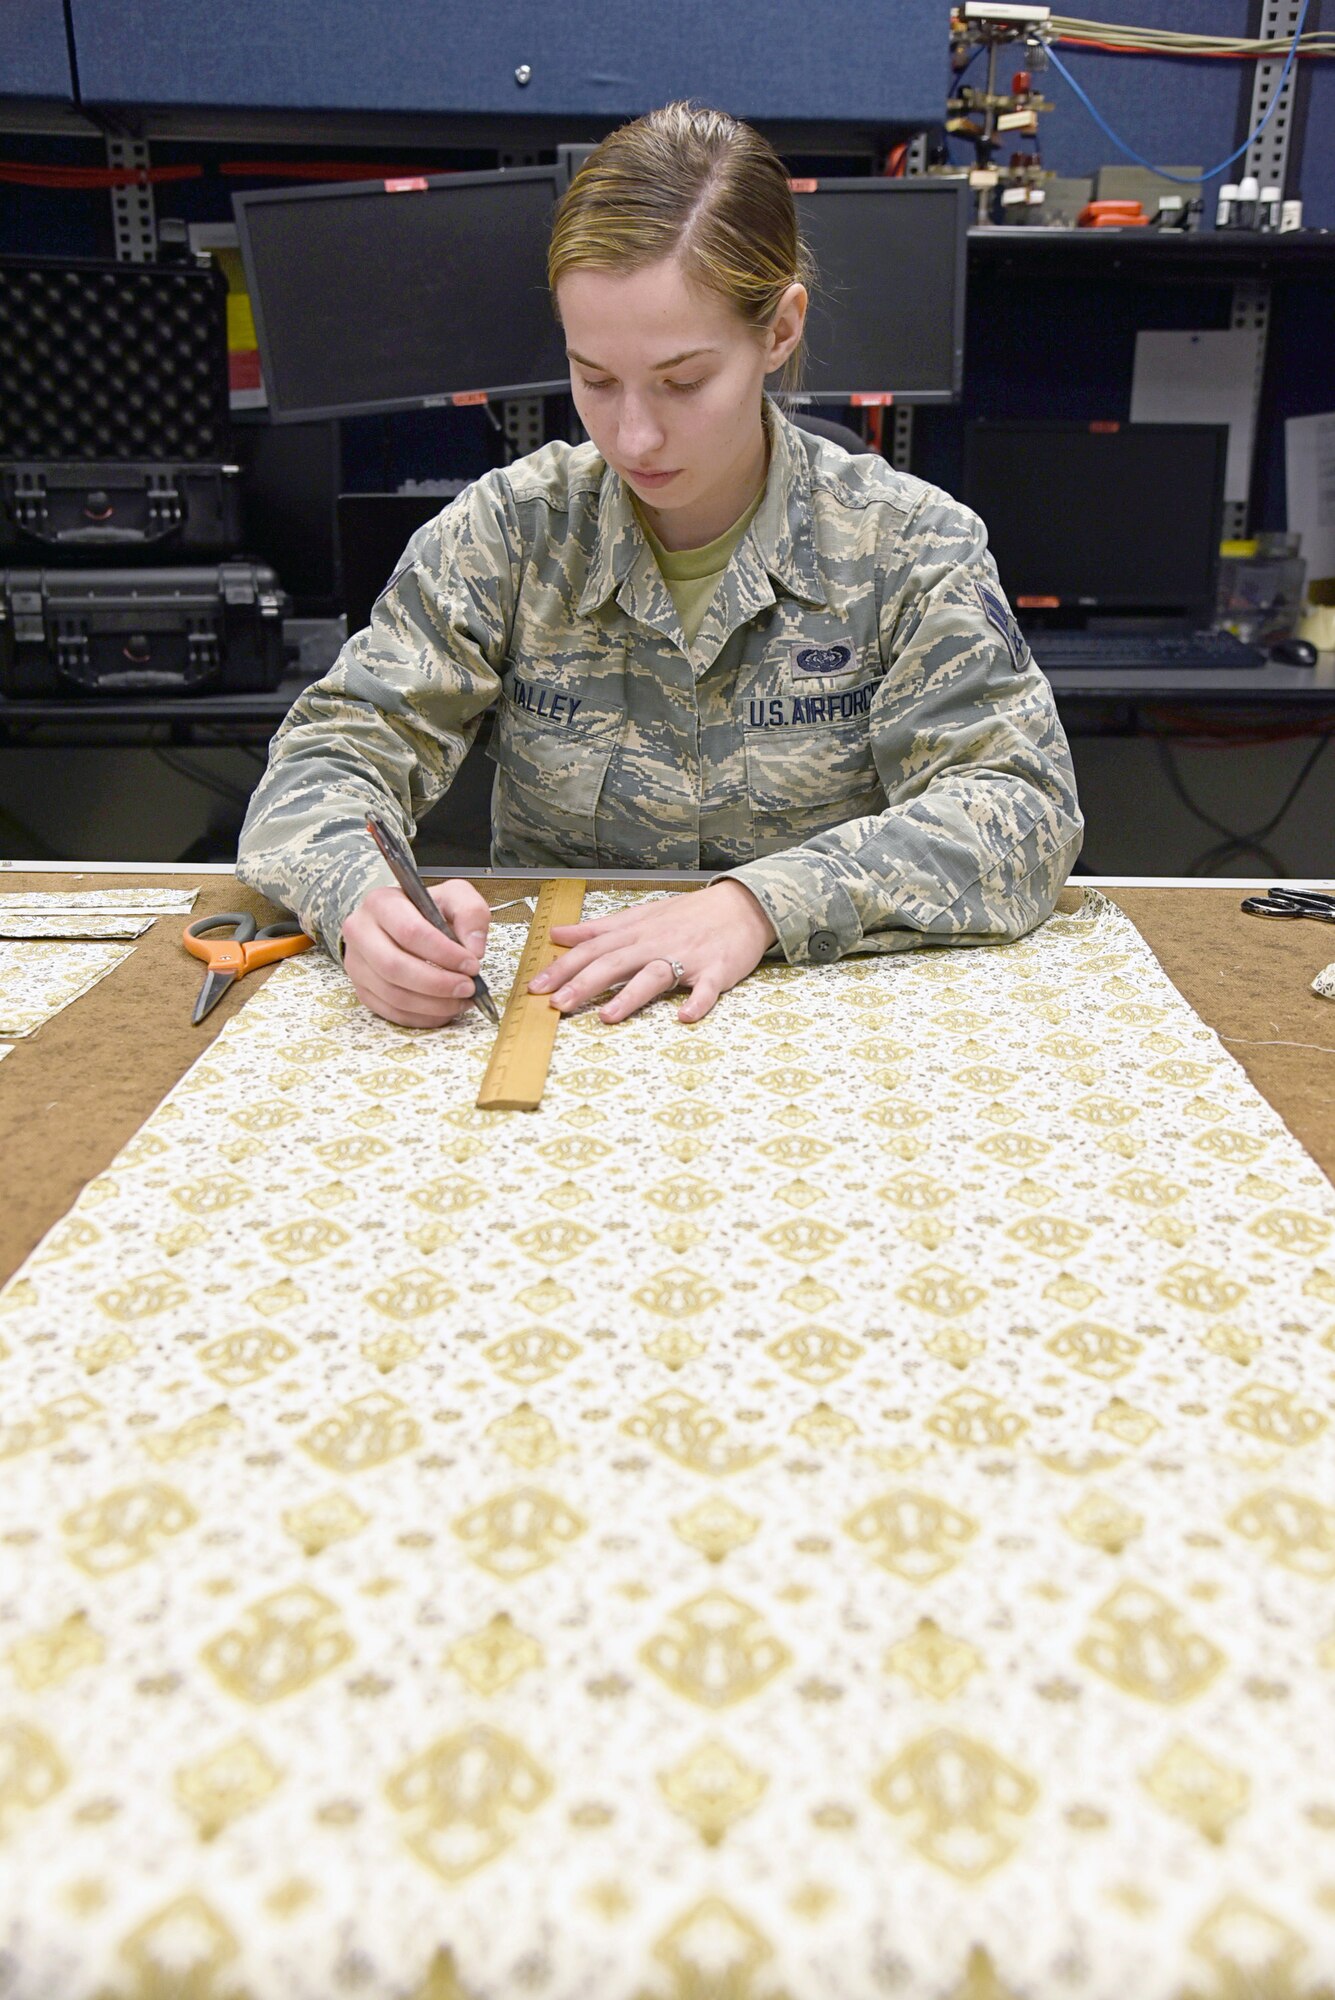 Airman First Class Sarah Talley, with the 552nd Air Control Network Squadron, measures fabric which will be made into face masks to be donated to local hospice and medical facilities around the Tinker community. Fabric and materials were donated by a local store, Sew and Sews, for this project. Over 100 fabric masks have already been made and are ready to donate. (U.S. Air Force photo/Kelly White)